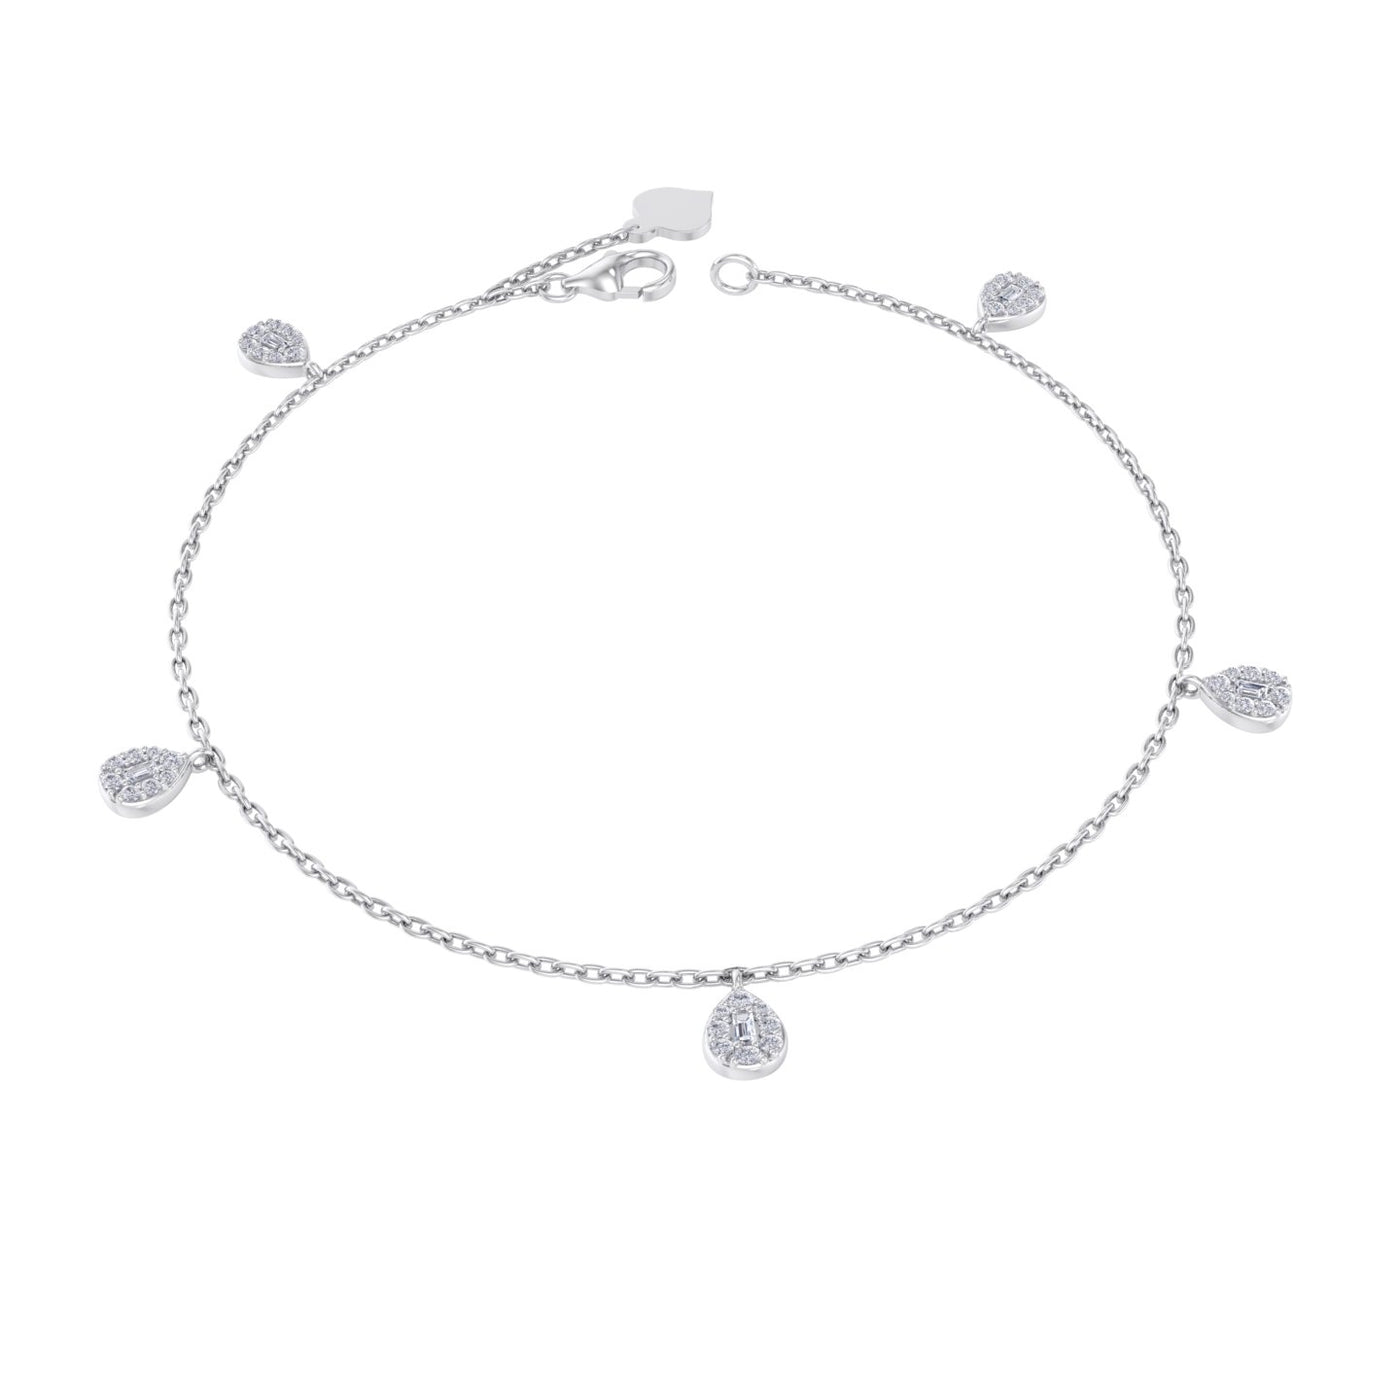 Charm bracelet in white gold with white diamonds of 0.32 ct in weight